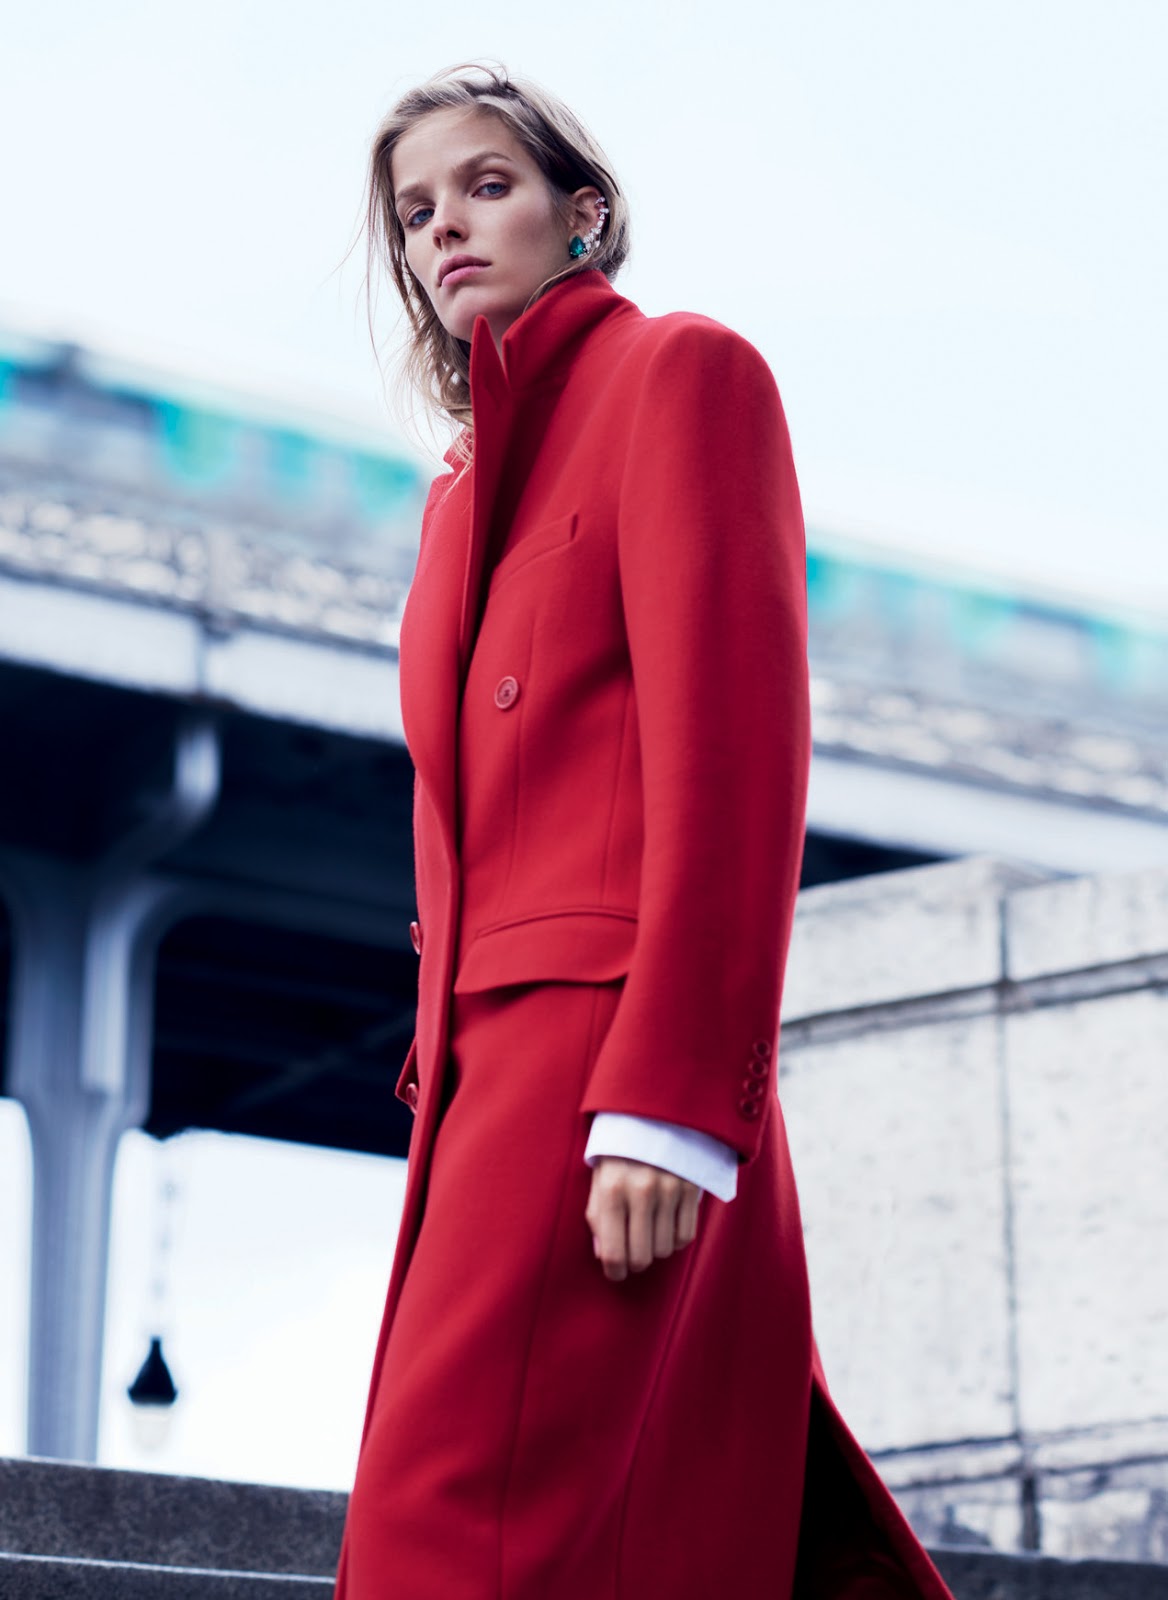 Gianluca Fontana Flashes Alisa Ahmann In 'Red Wave' For Air France ...